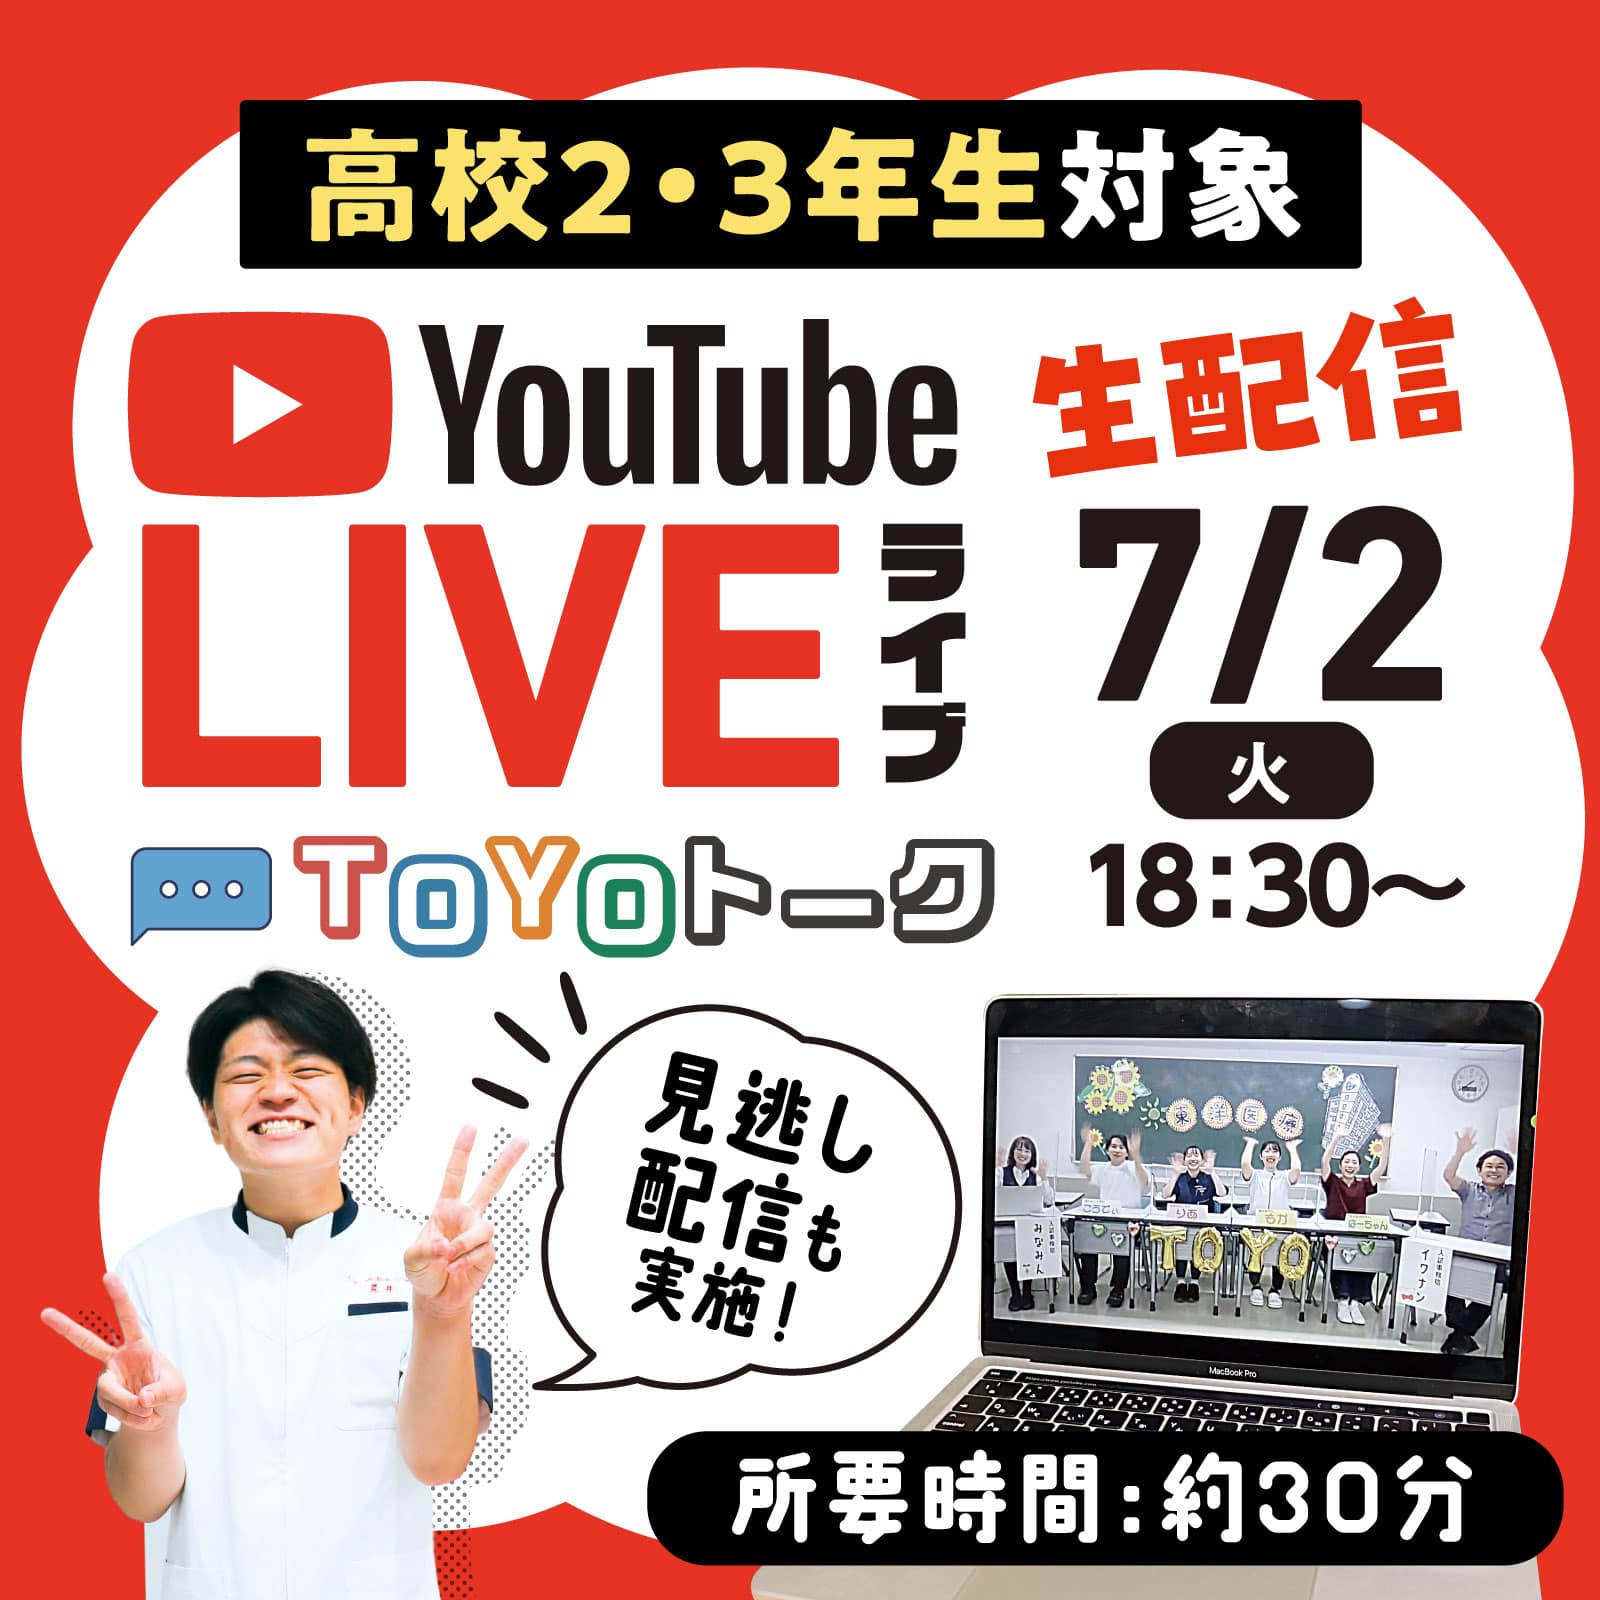 YouTube LIVE 見逃し配信も実施